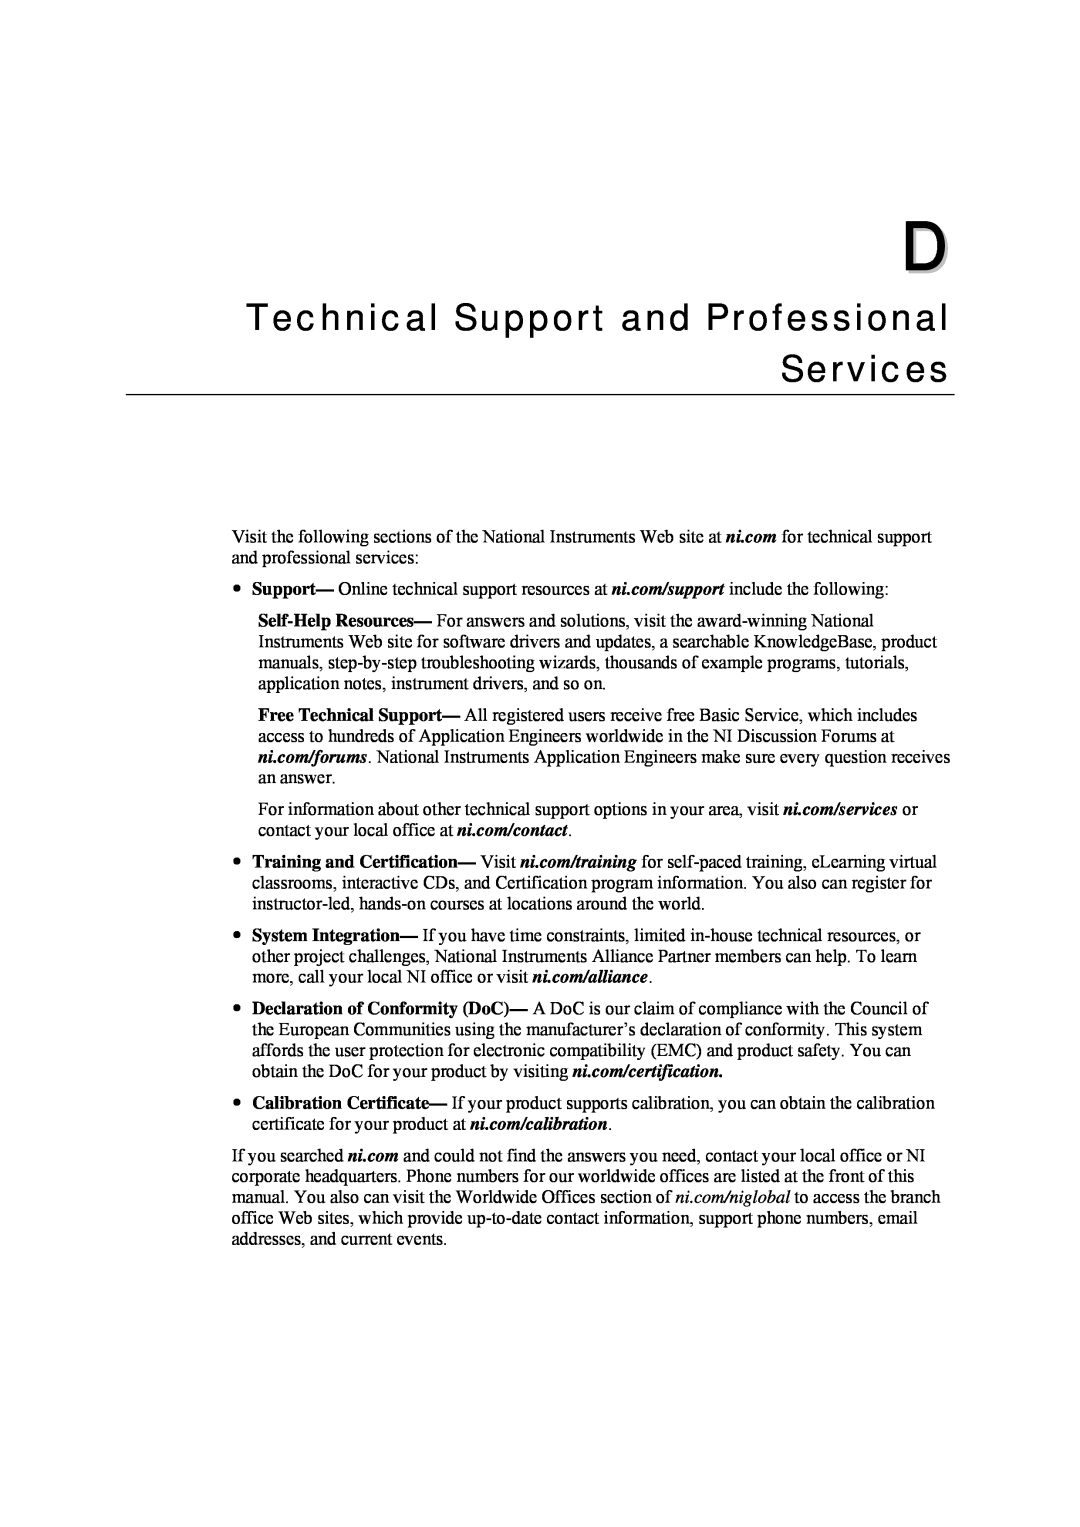 National Instruments WAP-3701, WAP-3711 user manual Technical Support and Professional Services 